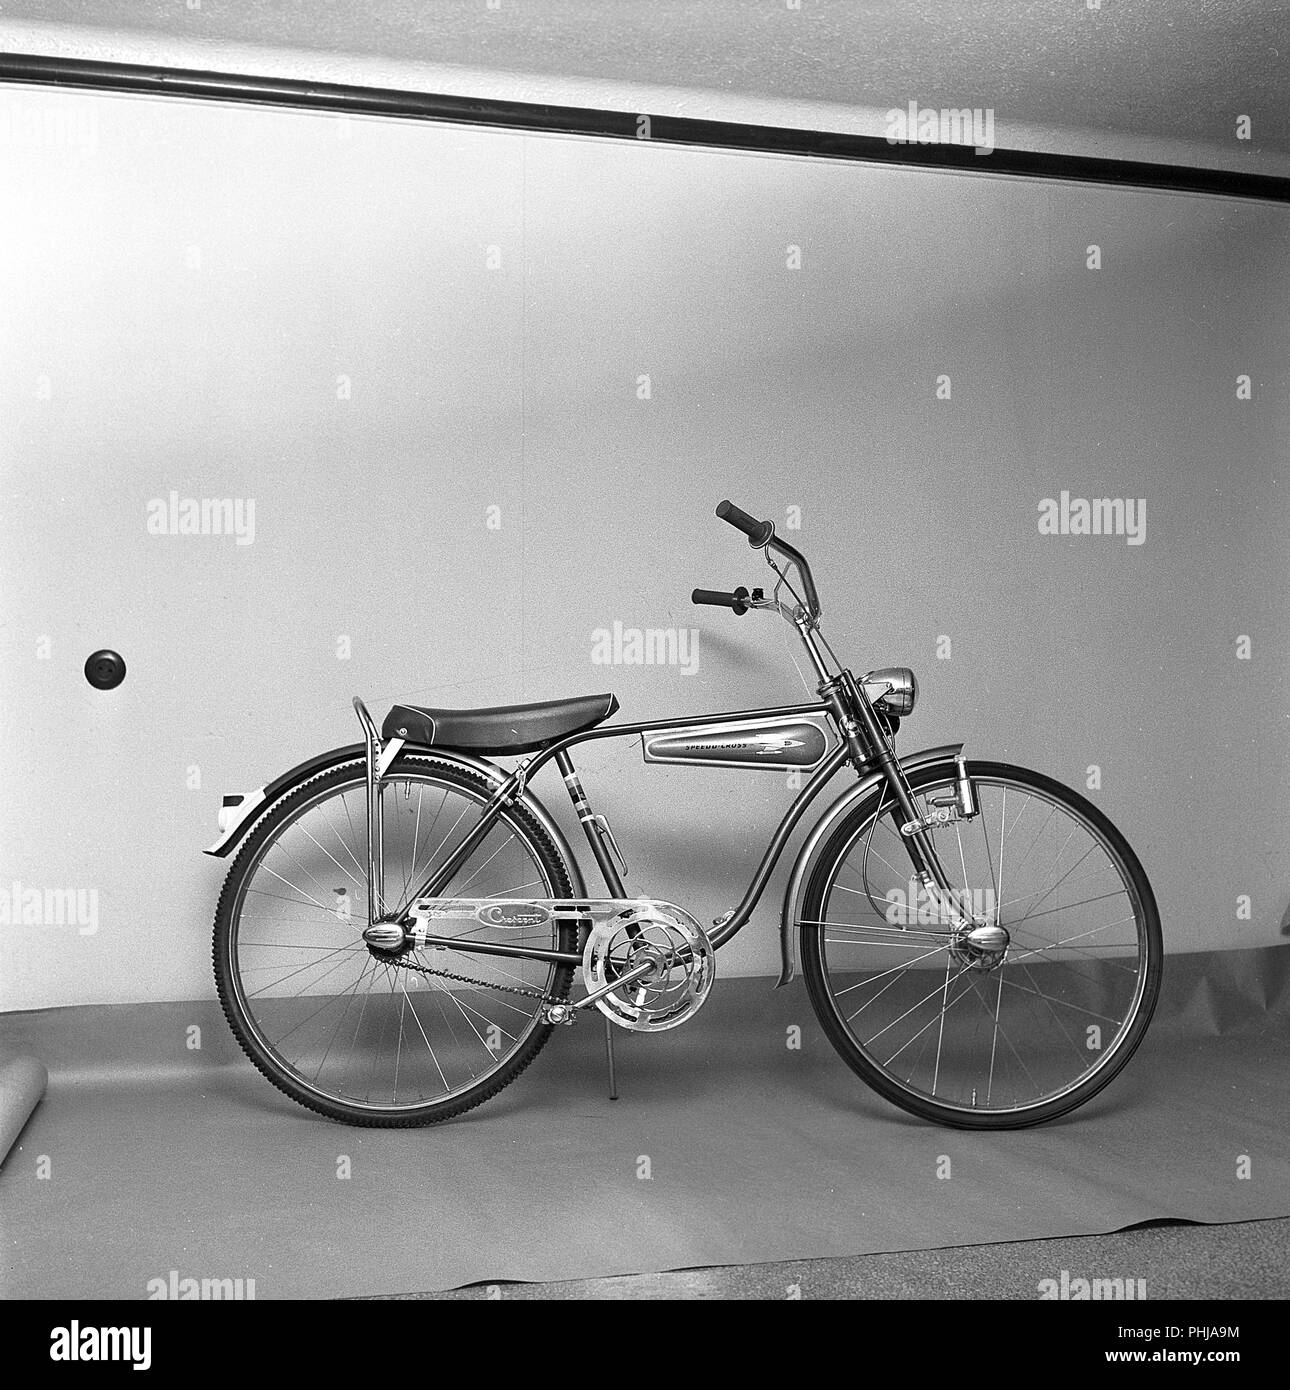 1950s bicycle. A childrens bicycle model Speed Cross  Crescent. A design with the space age in mind and a rocket pictured on the design tank. A model that was considered the coolest thing around for a child of the 1950s with high handlebars, front drum break and a loaf seat. Sweden 1956 ref CV15-9 Stock Photo